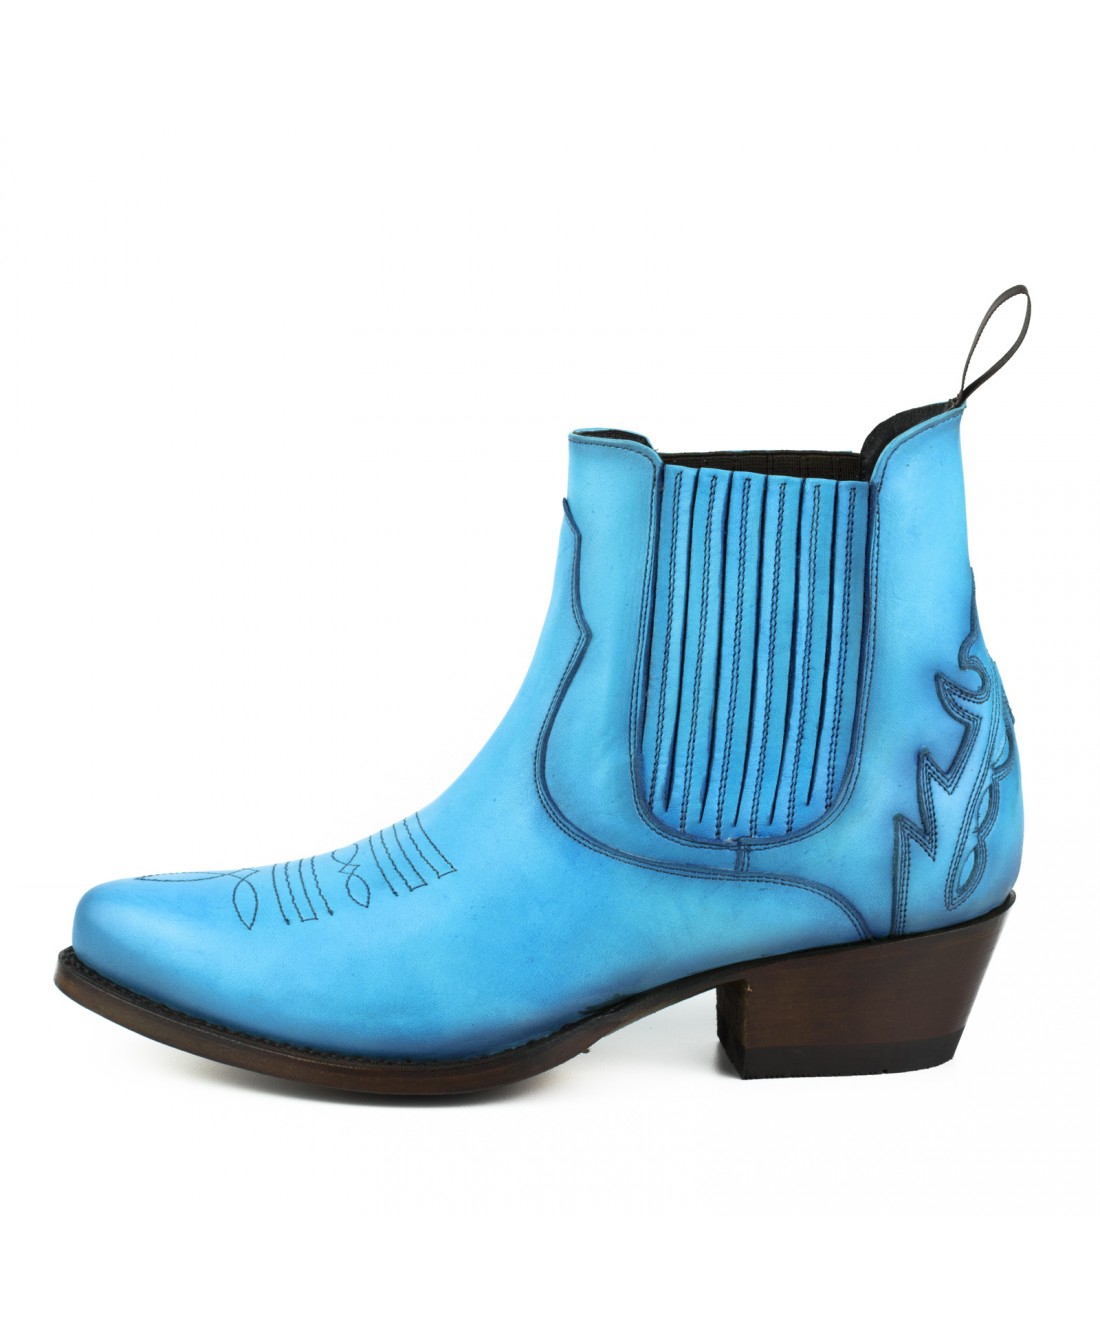 Mayura 2487 Marilyn Turquoise Ladies Cowboy Ankle Boots